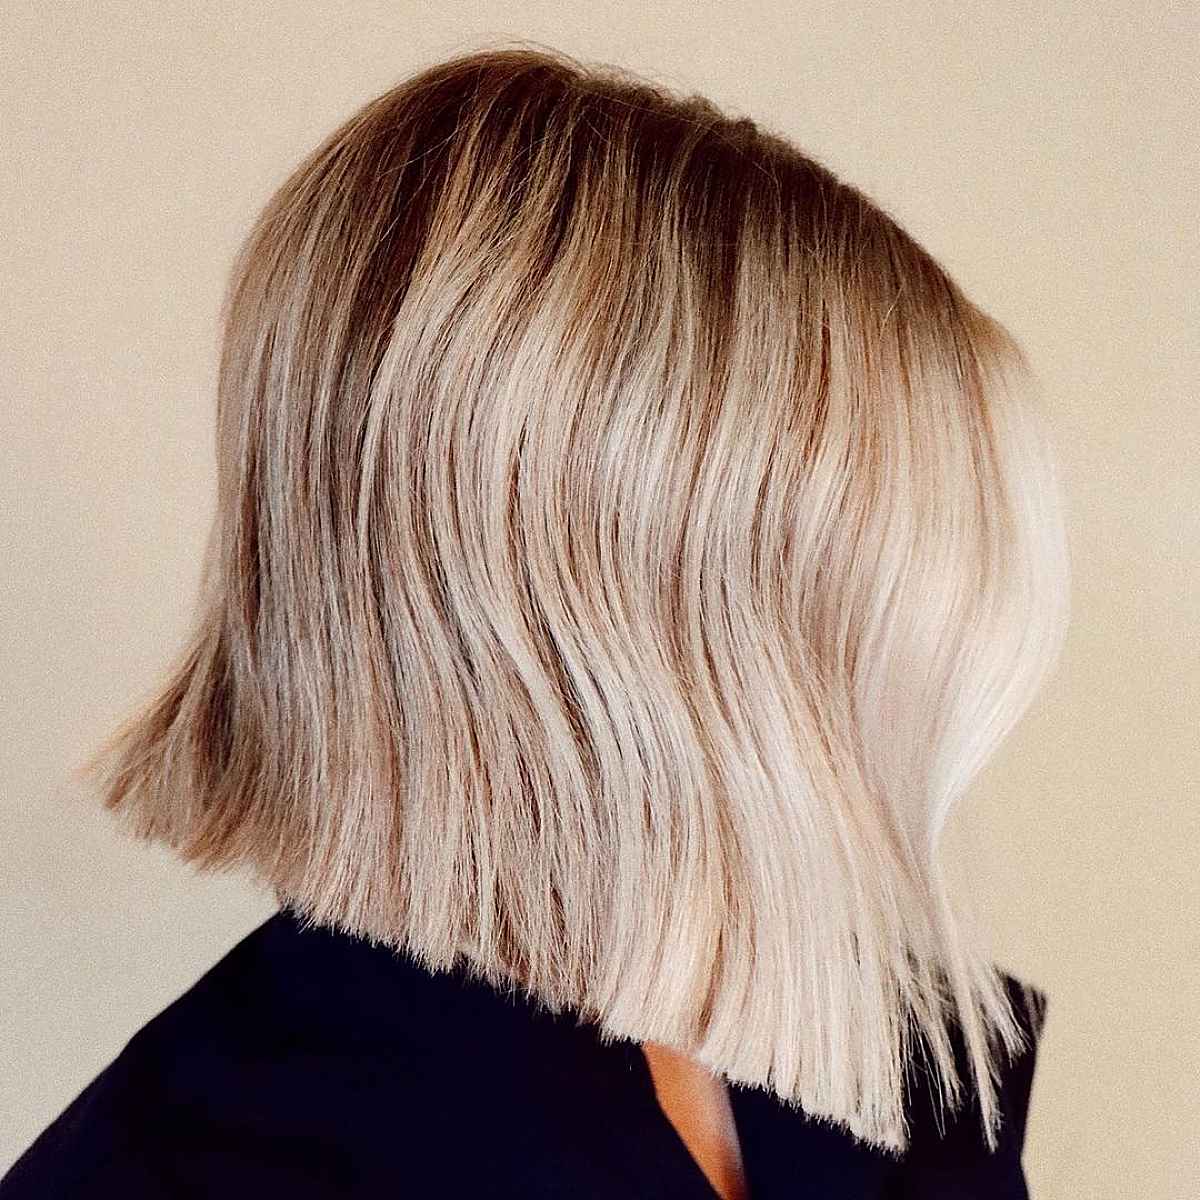 graduated bob with blonde and dark roots